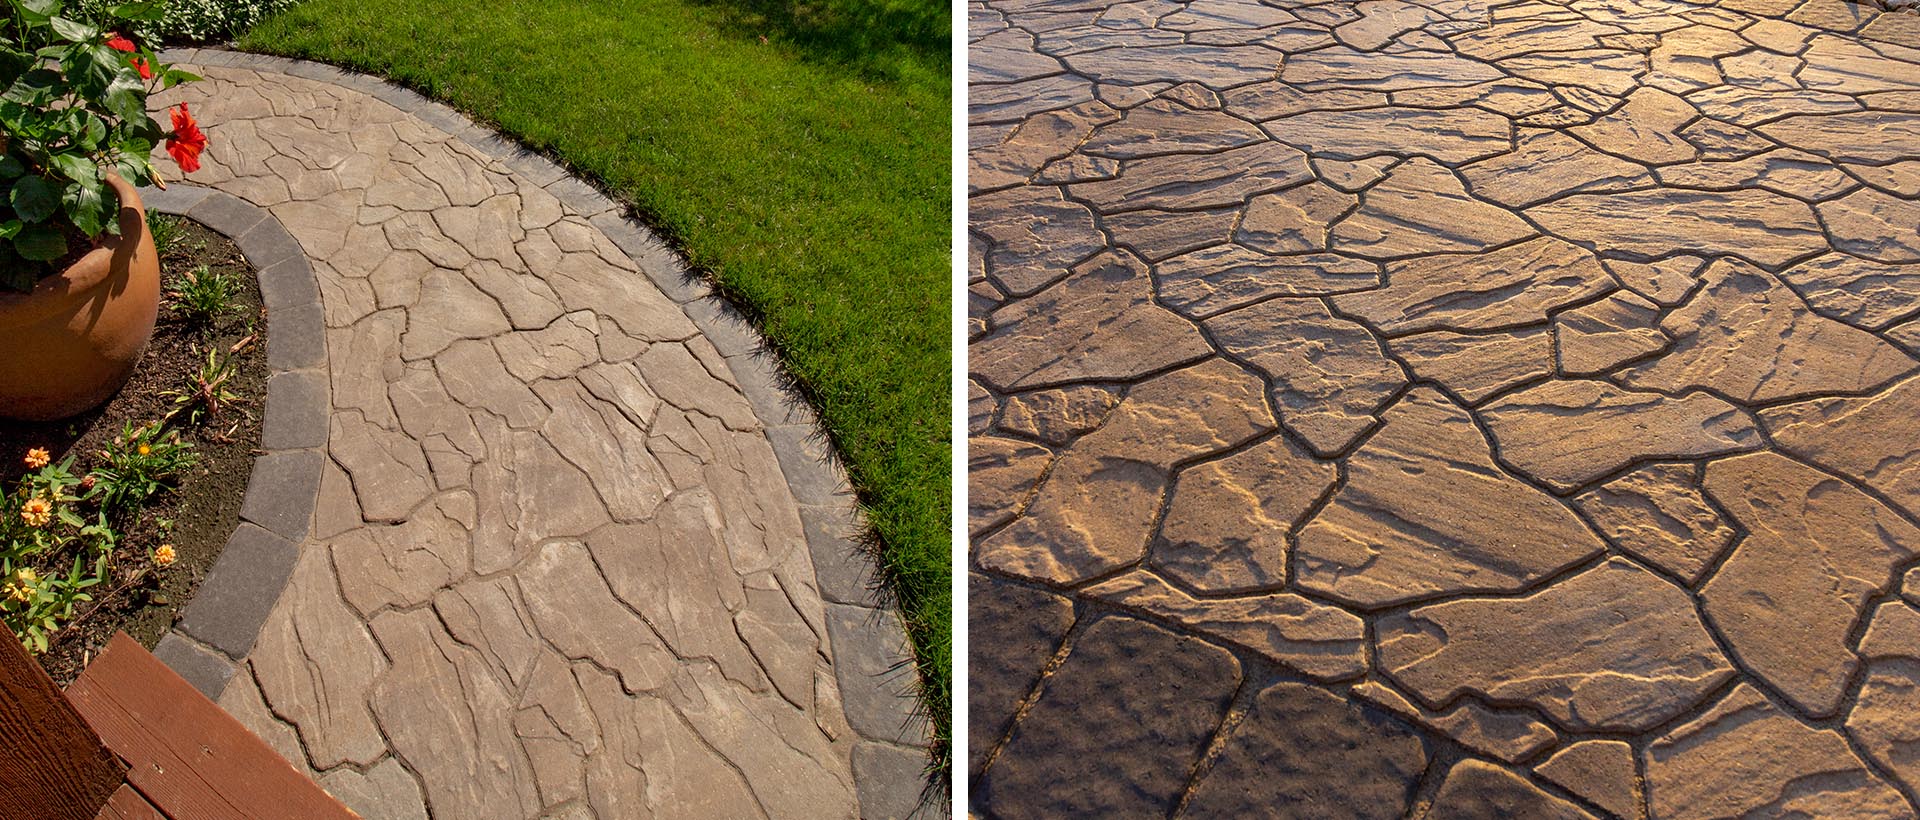 Colonial Pavers have smooth/dimpled tops, irregular edges and small auto-spacers. These popular pavers look like decades-worn cobbles and are popular for patios, paths, pool decks and vehicular applications.